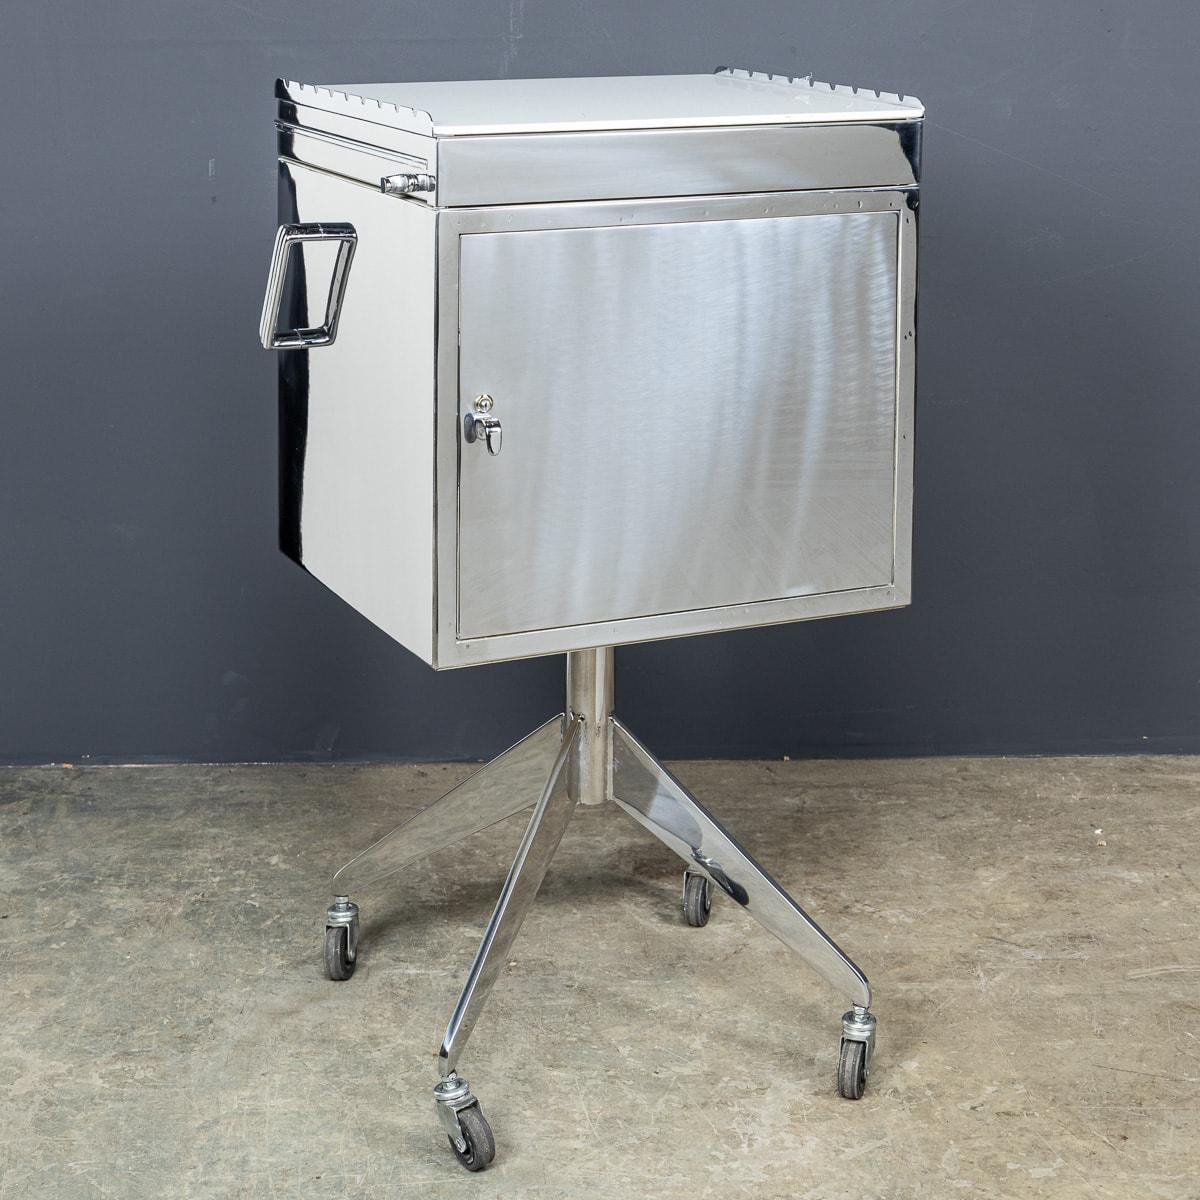 A vinatge mid 20th Century swivel cabinet crafted and designed by Italian designer Alessandro Weiss. This cabinet boasts a sleek, highly polished exterior with the top retaining the pristine white enamel finish, originally used as a dentistry